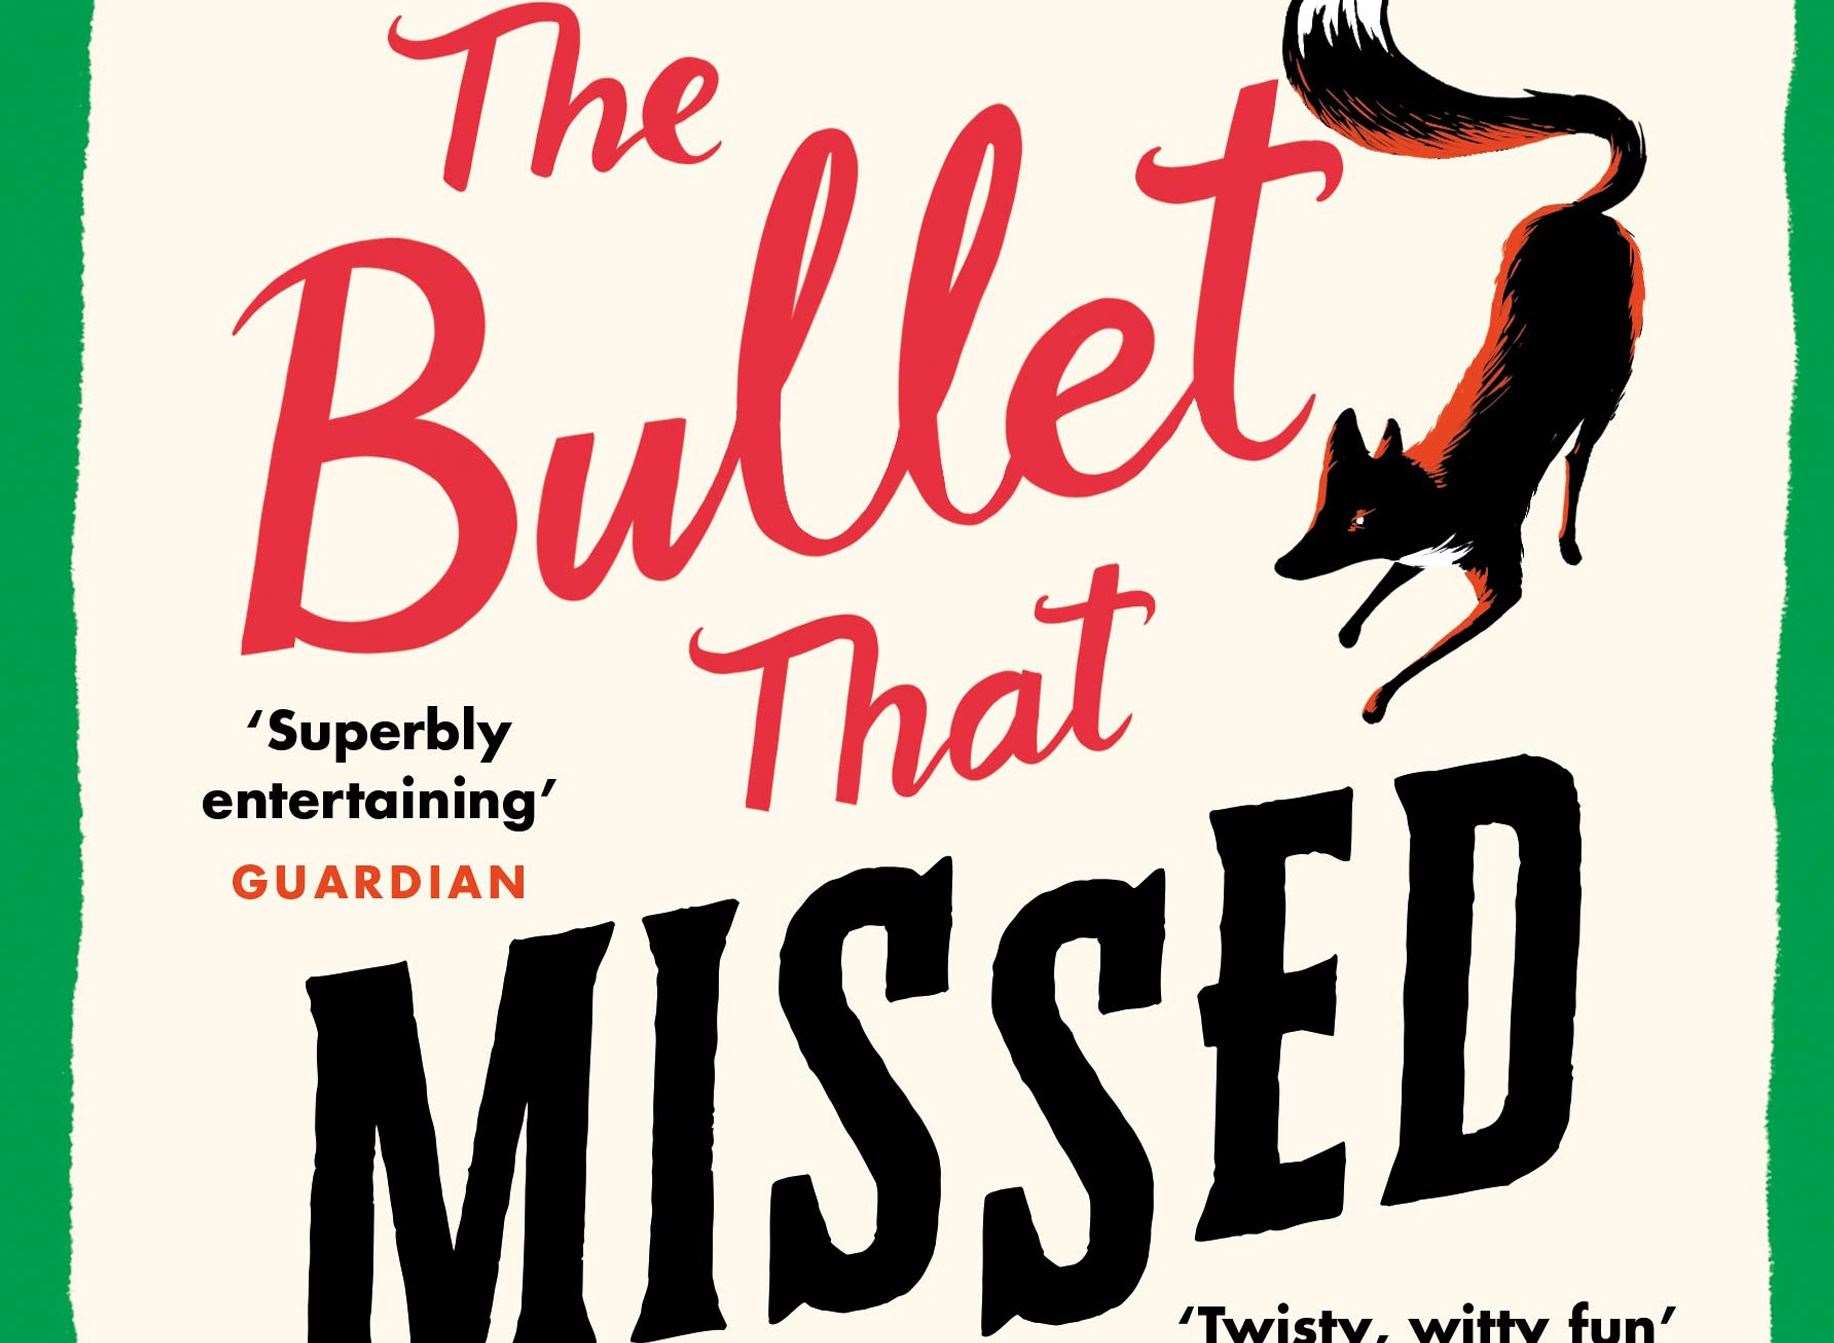 Richard Osman's The Bullet That Missed is on sale now